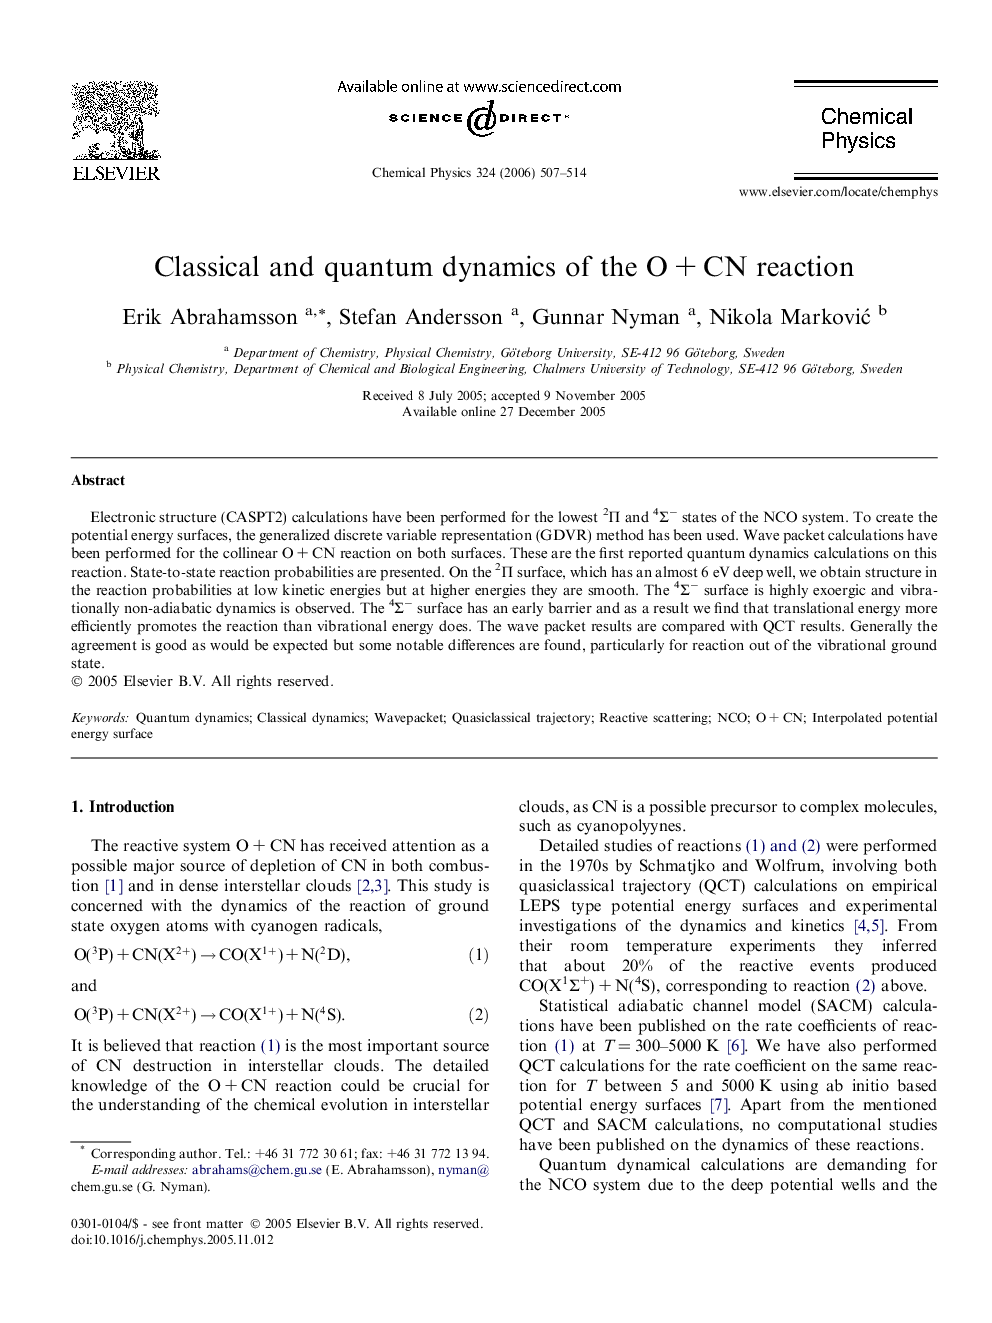 Classical and quantum dynamics of the OÂ +Â CN reaction